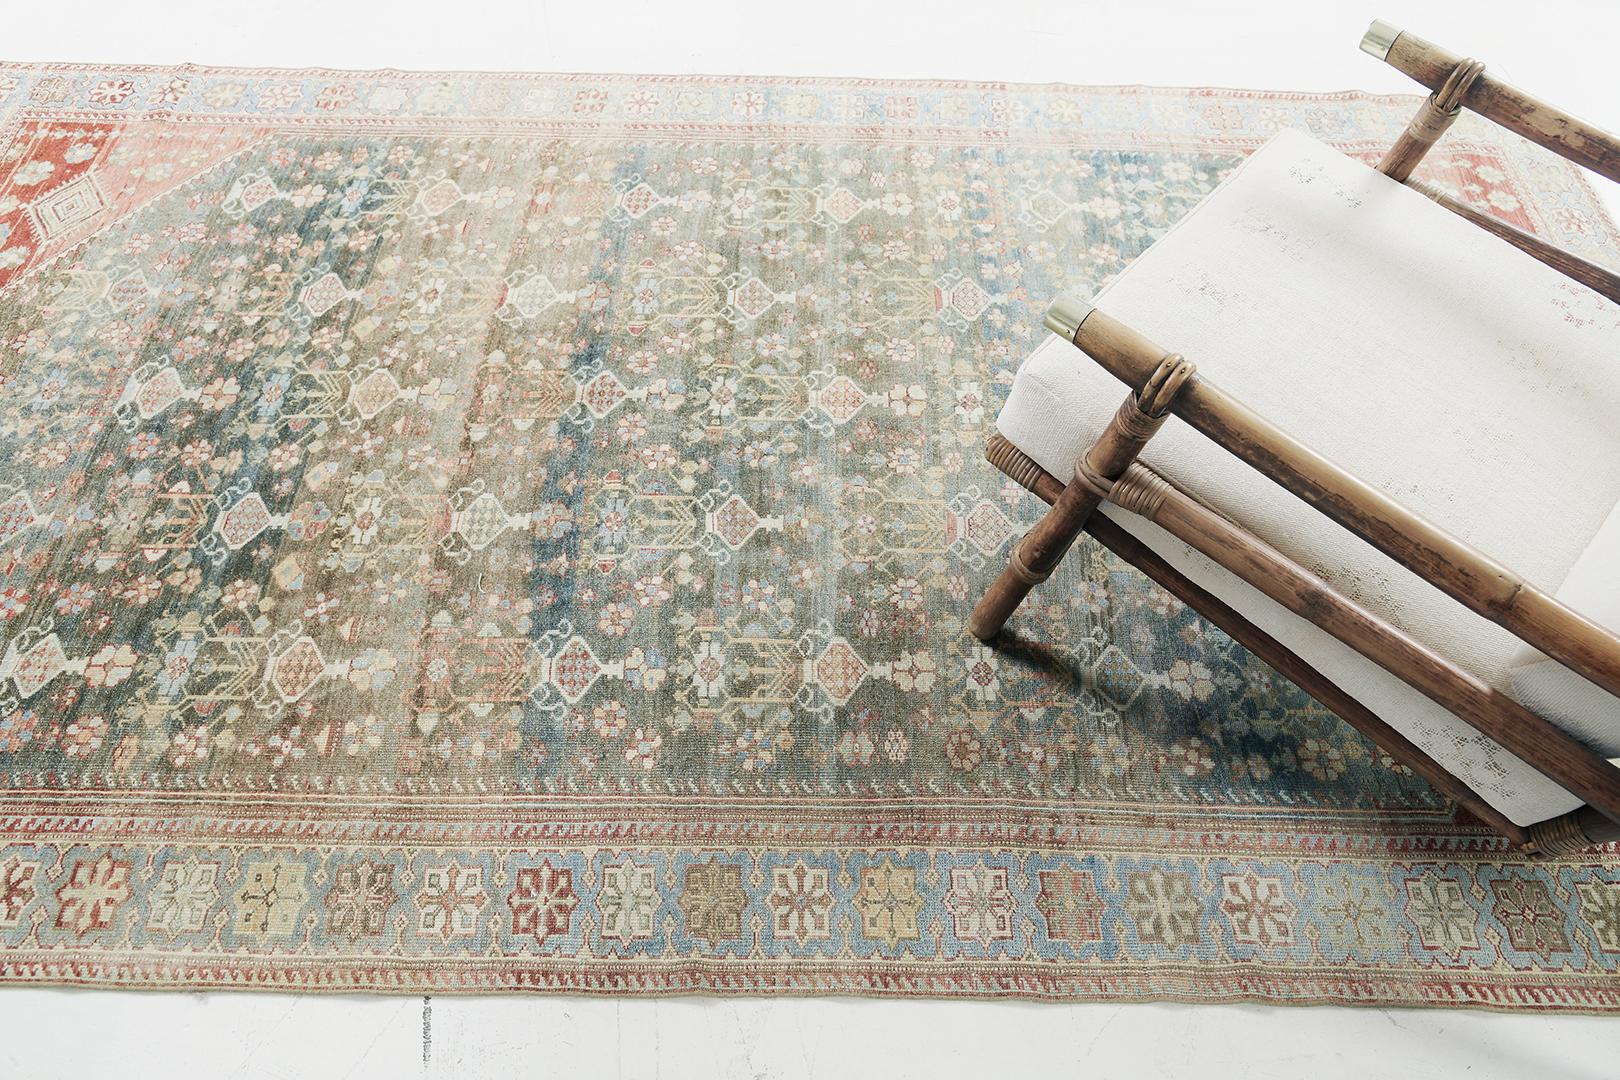 With its sophisticated vibe and impressive time-worn appeal, this antique Persian Malayer rug embodies a rustic botanical style. It features a dance of dainty florid elements that are graciously spread across the deep sea green abrashed.